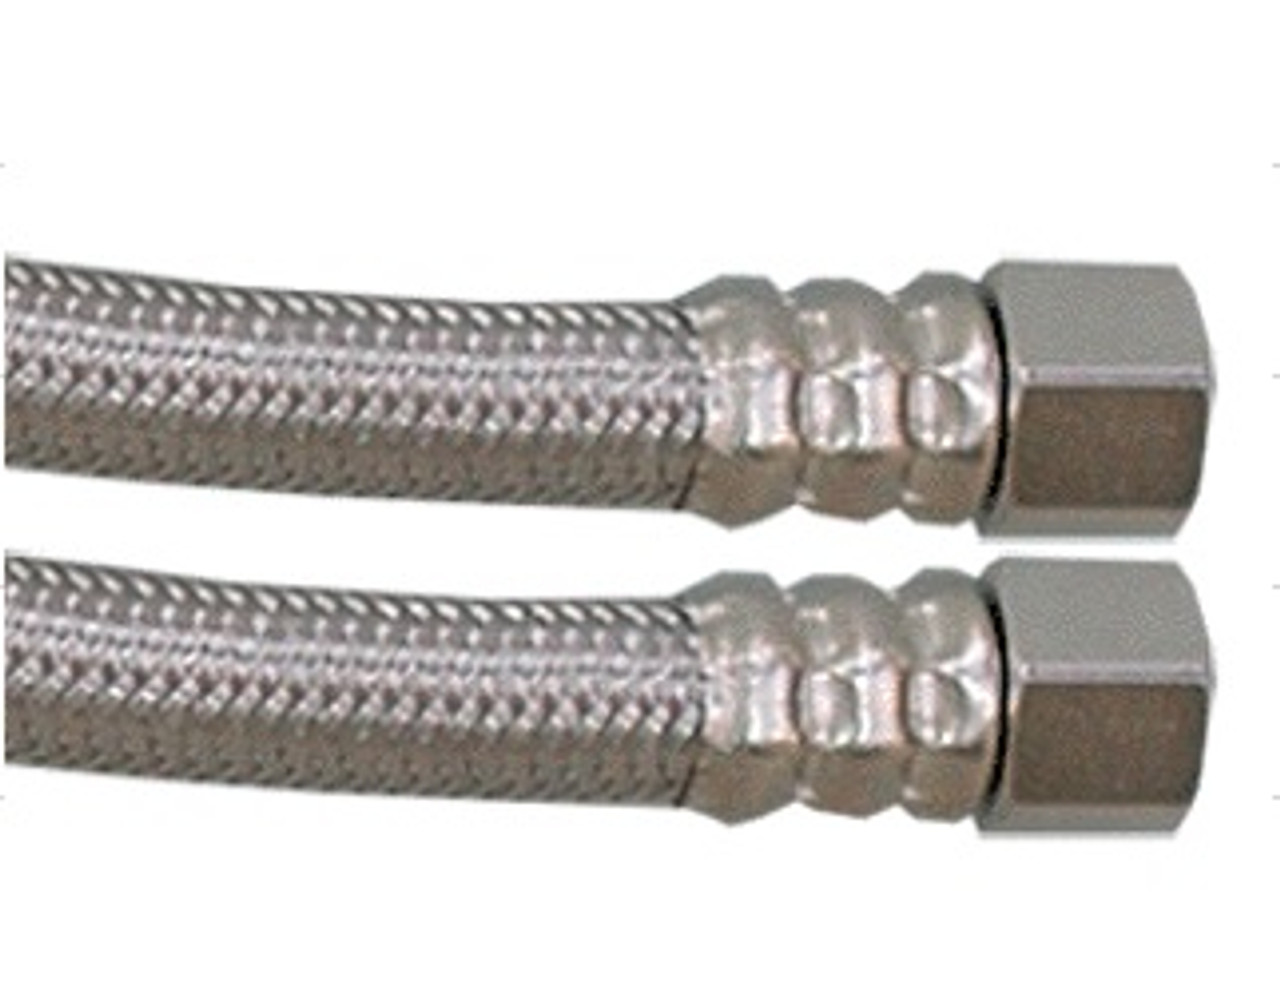 3/8c x 3/8c BRAIDED STAINLESS STEEL HOSE